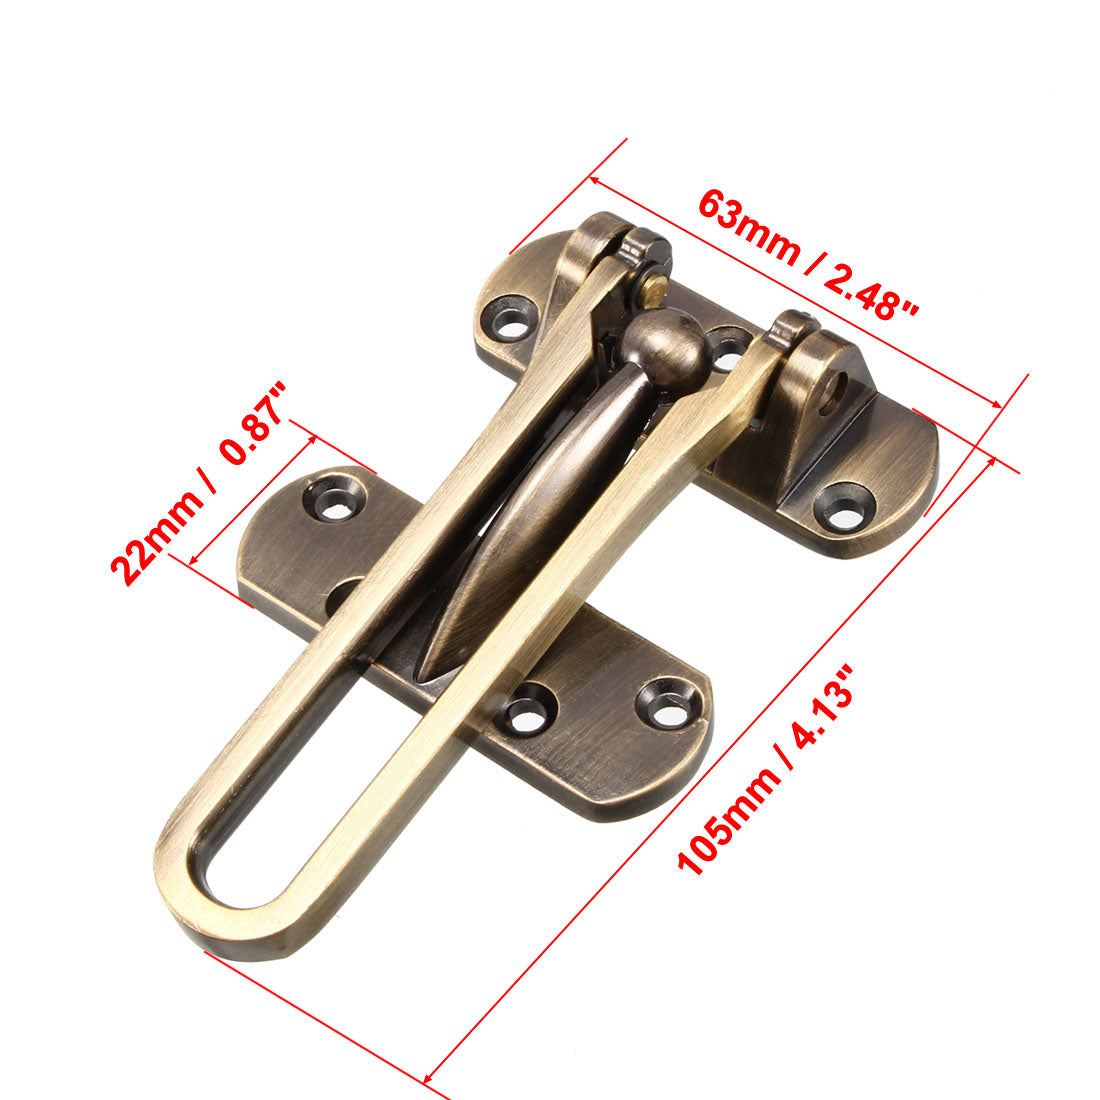 uxcell Uxcell Swing Bar Lock for Hinged Swing Secondary Security Lock for Door and Home Security, 4.13" Bar Length, Bronze, Zinc Alloy, 2pcs